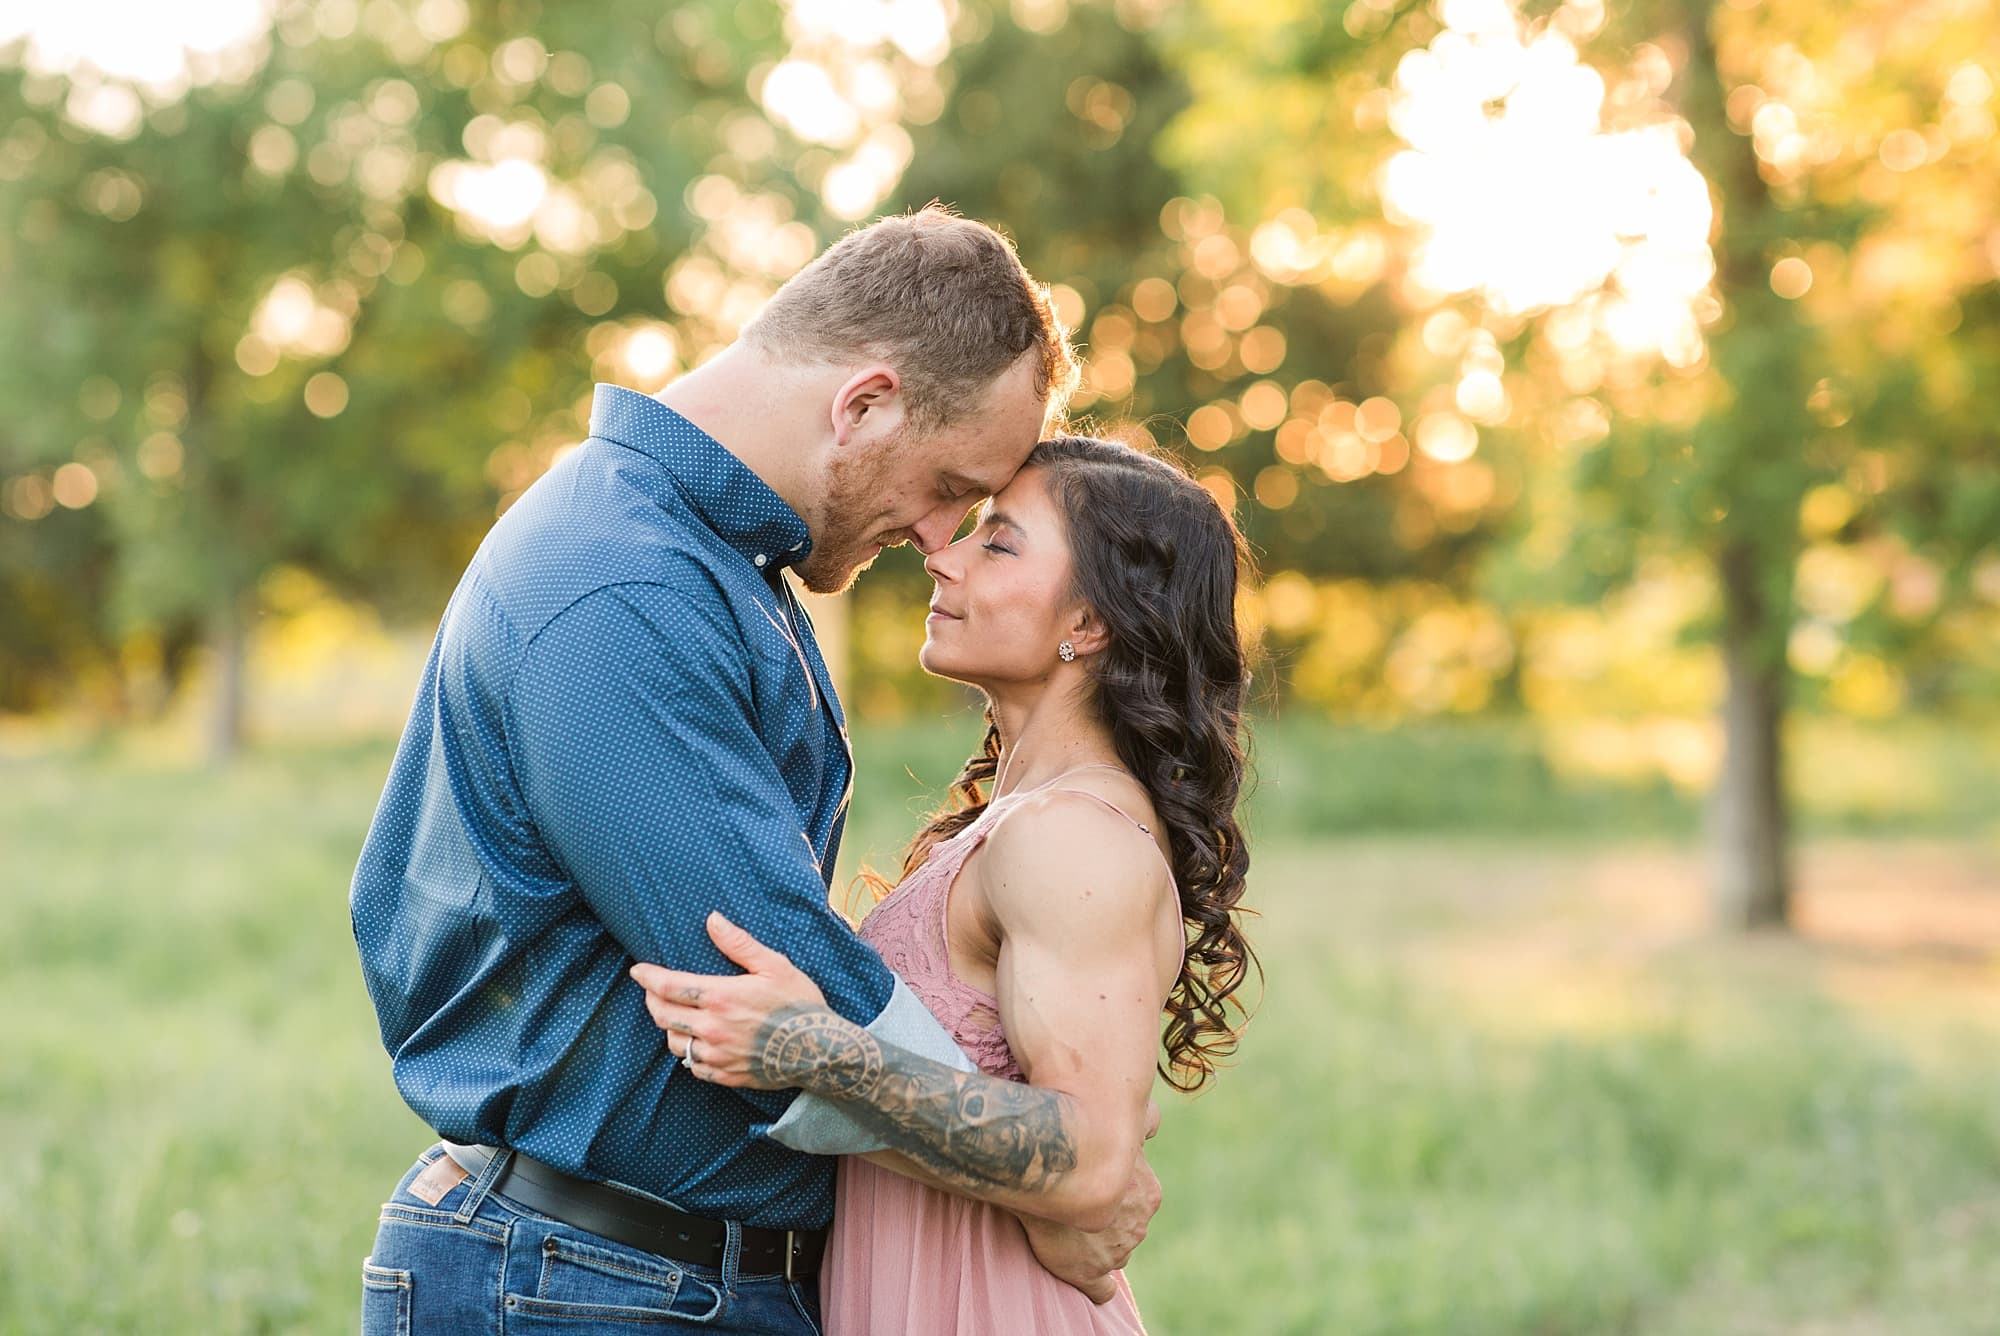 A couple lean into each other with the sunset coming through the trees in the background during their Engagement Session in Lions Conservancy Park